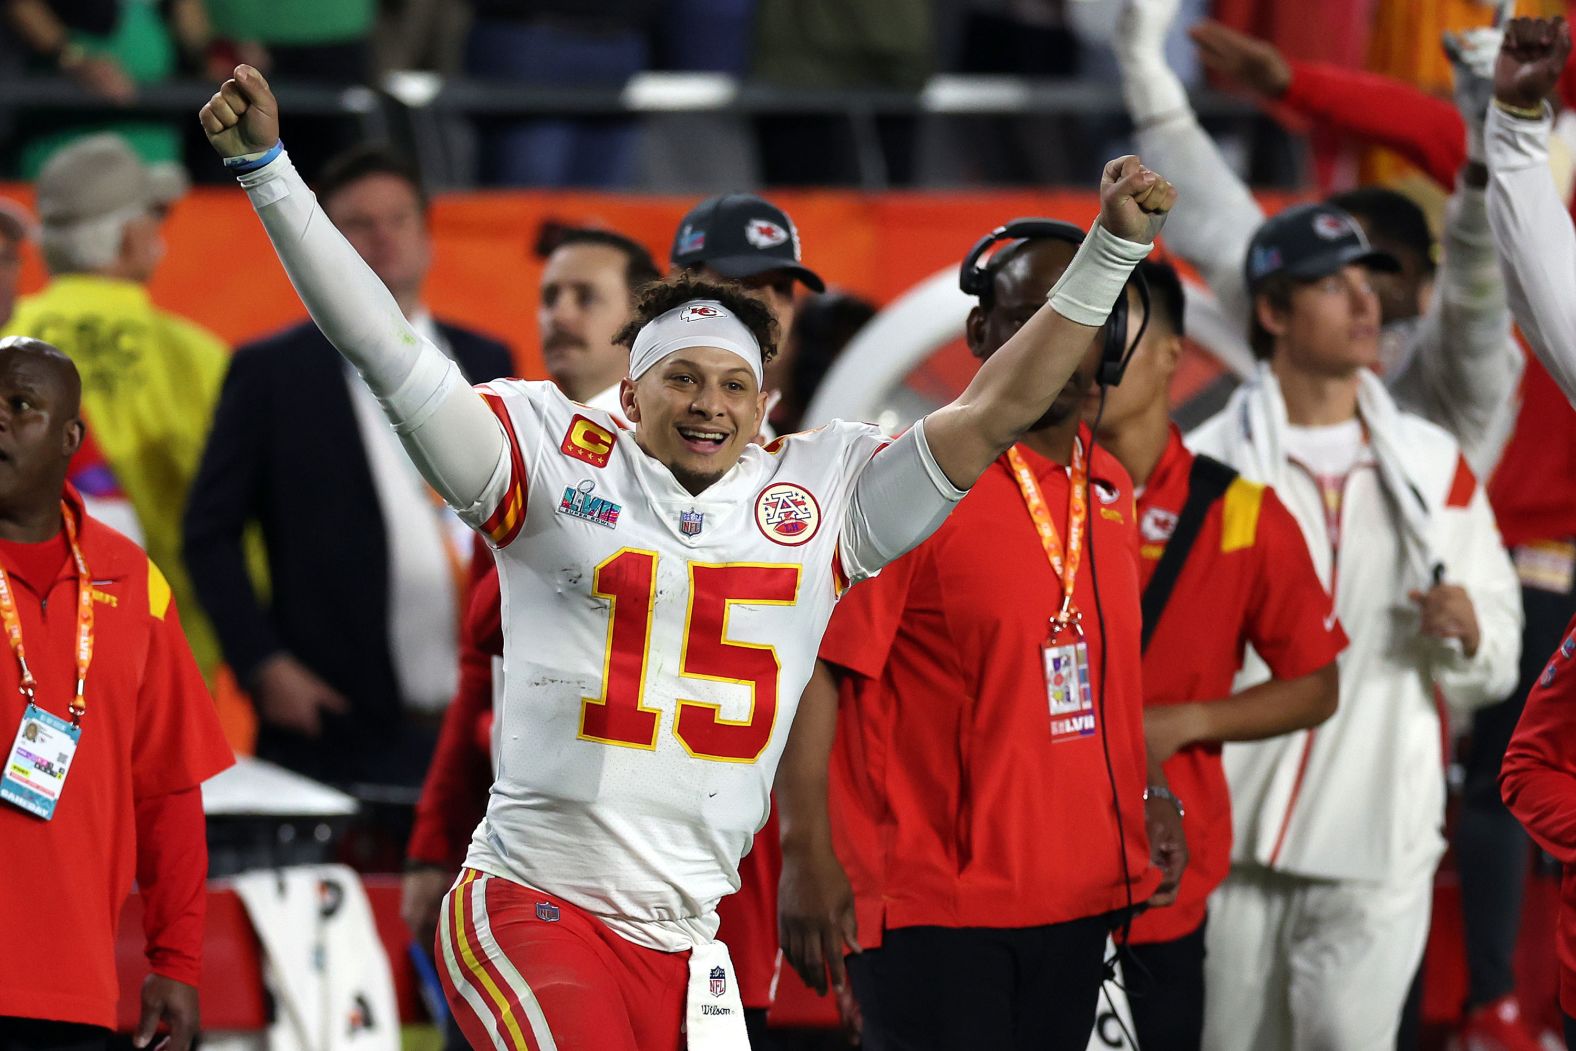 Mahomes celebrates at the end of the game.